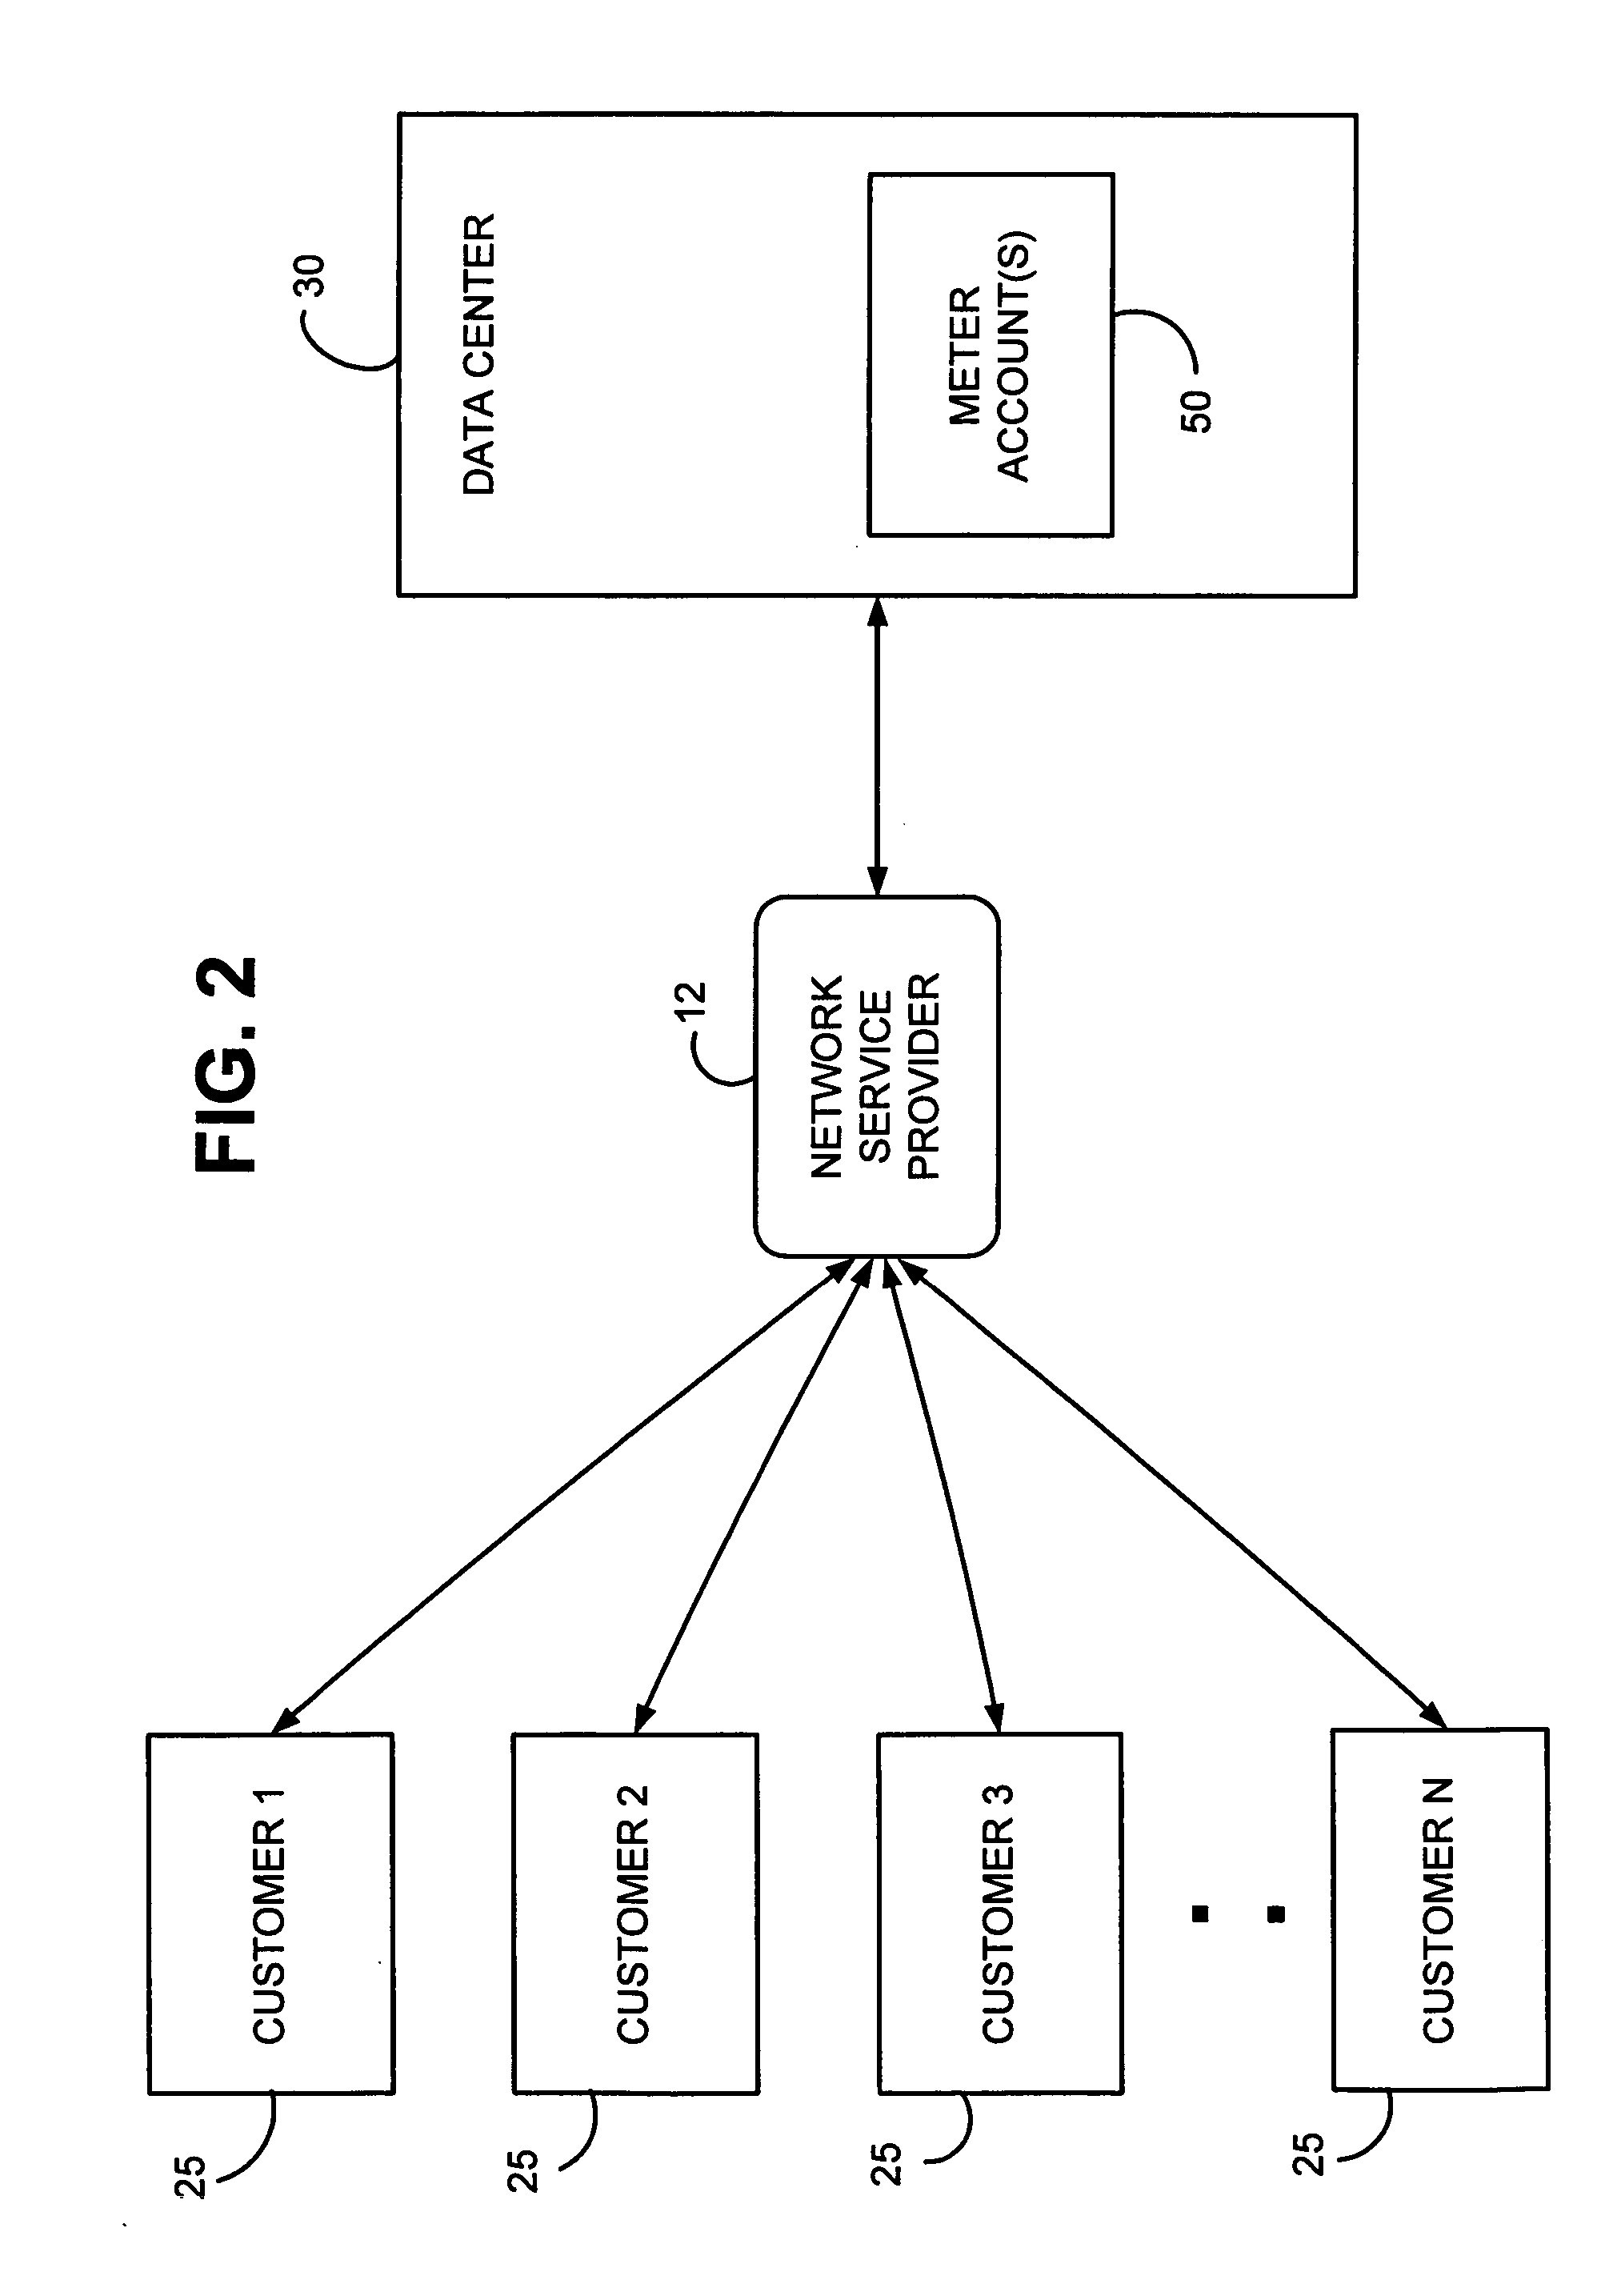 System and method for instant online postage metering